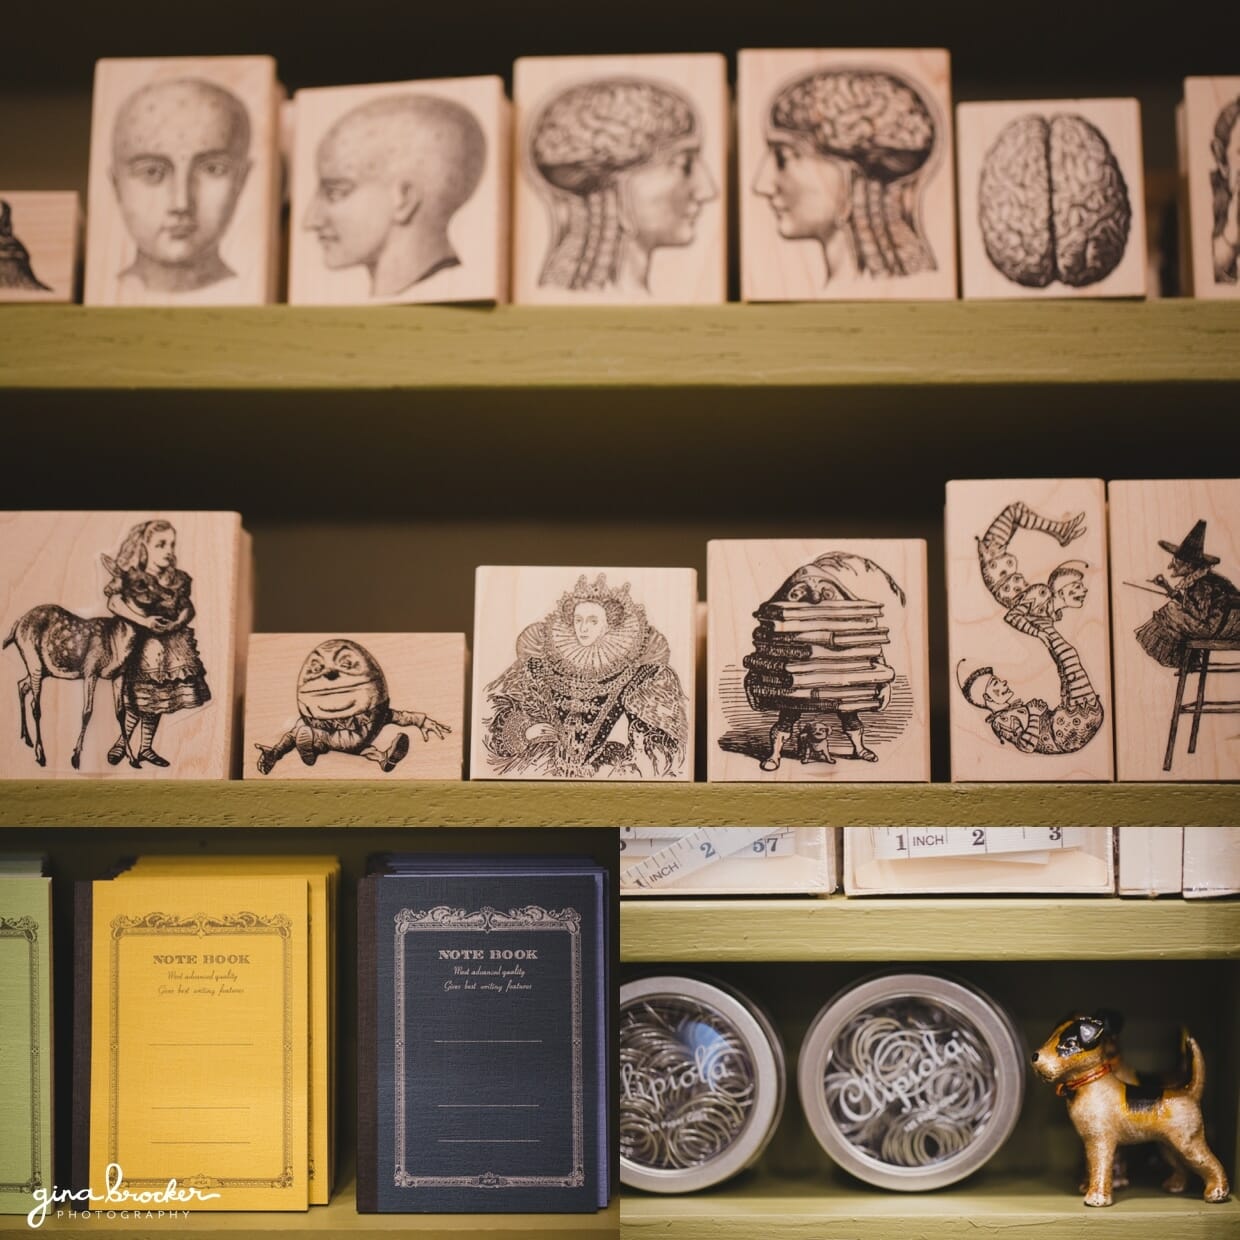 Traditional rubber stamps, beautiful notebooks and cute stationary are all available at Black Ink in Boston